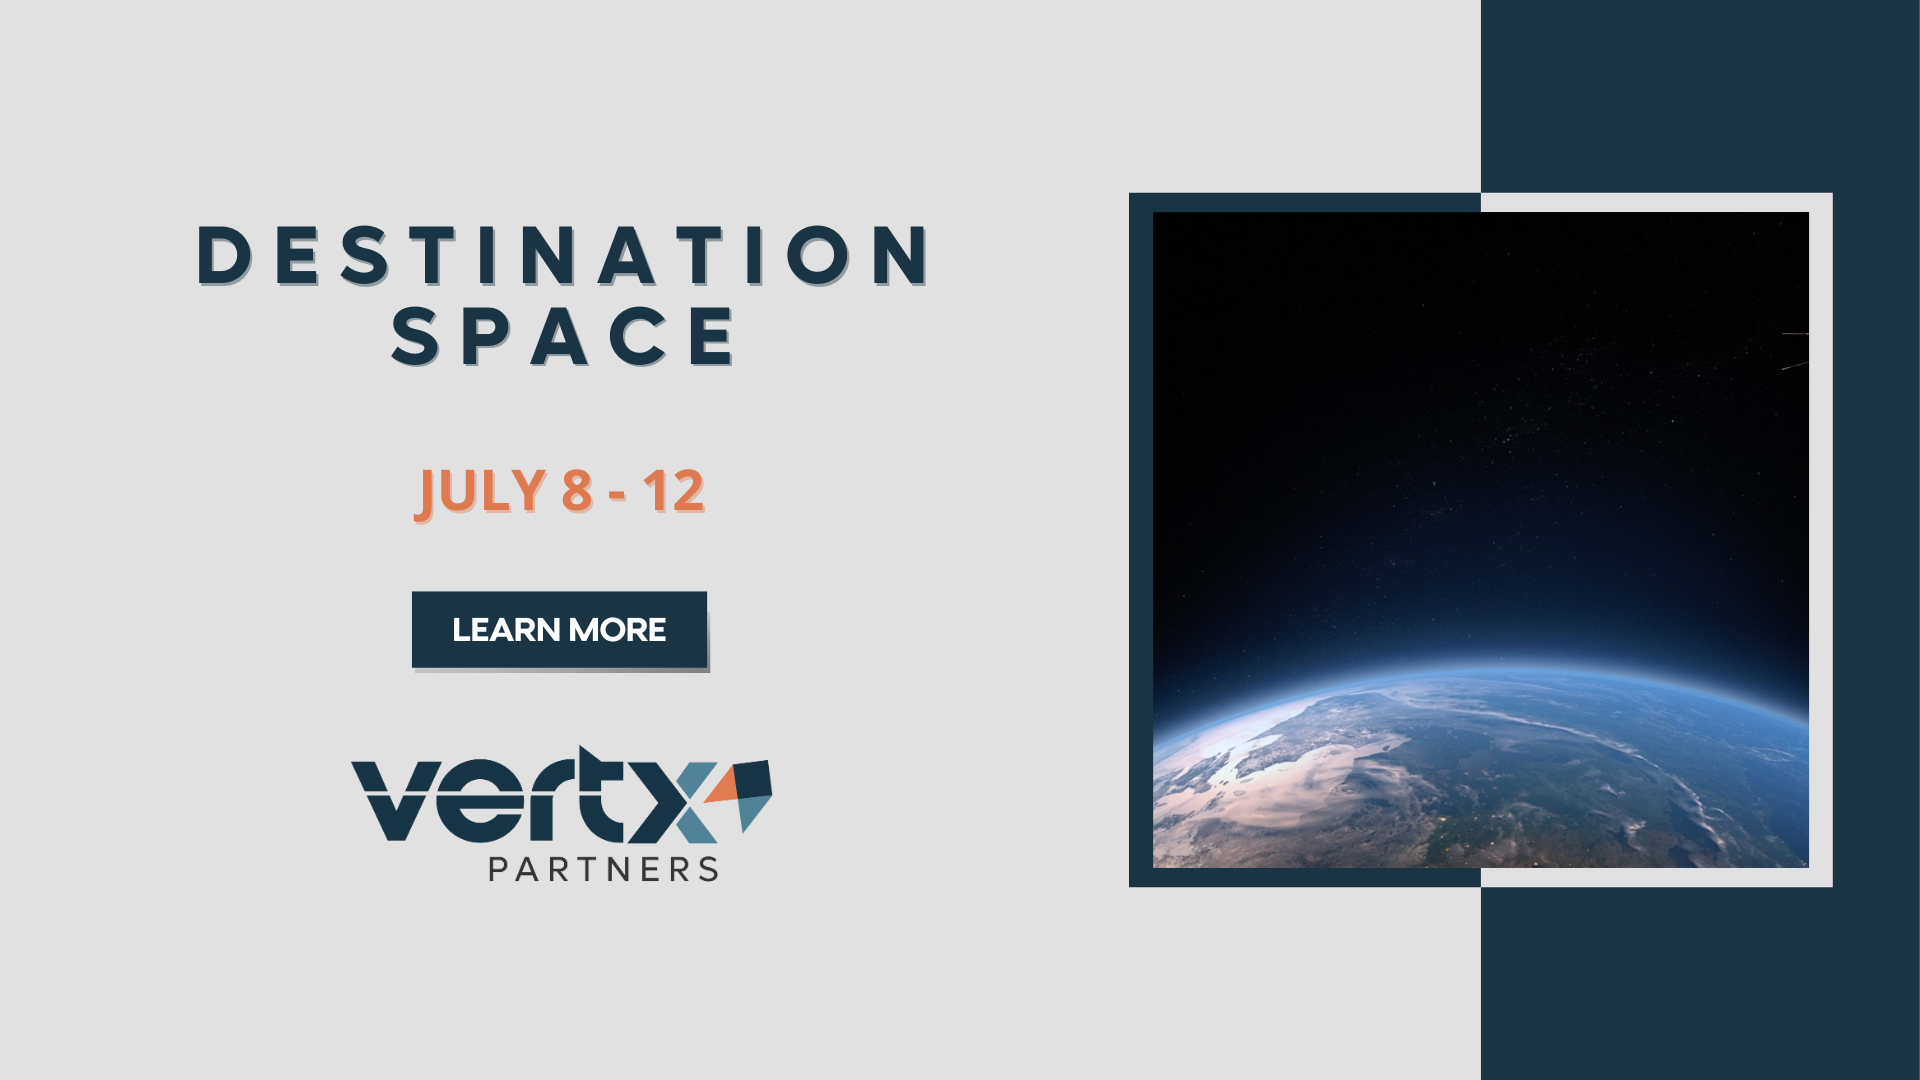 This graphic has the title "Destination SPACE" with the date July 8-12th under it a photo of the earth with space in the background to the right of the title and date.